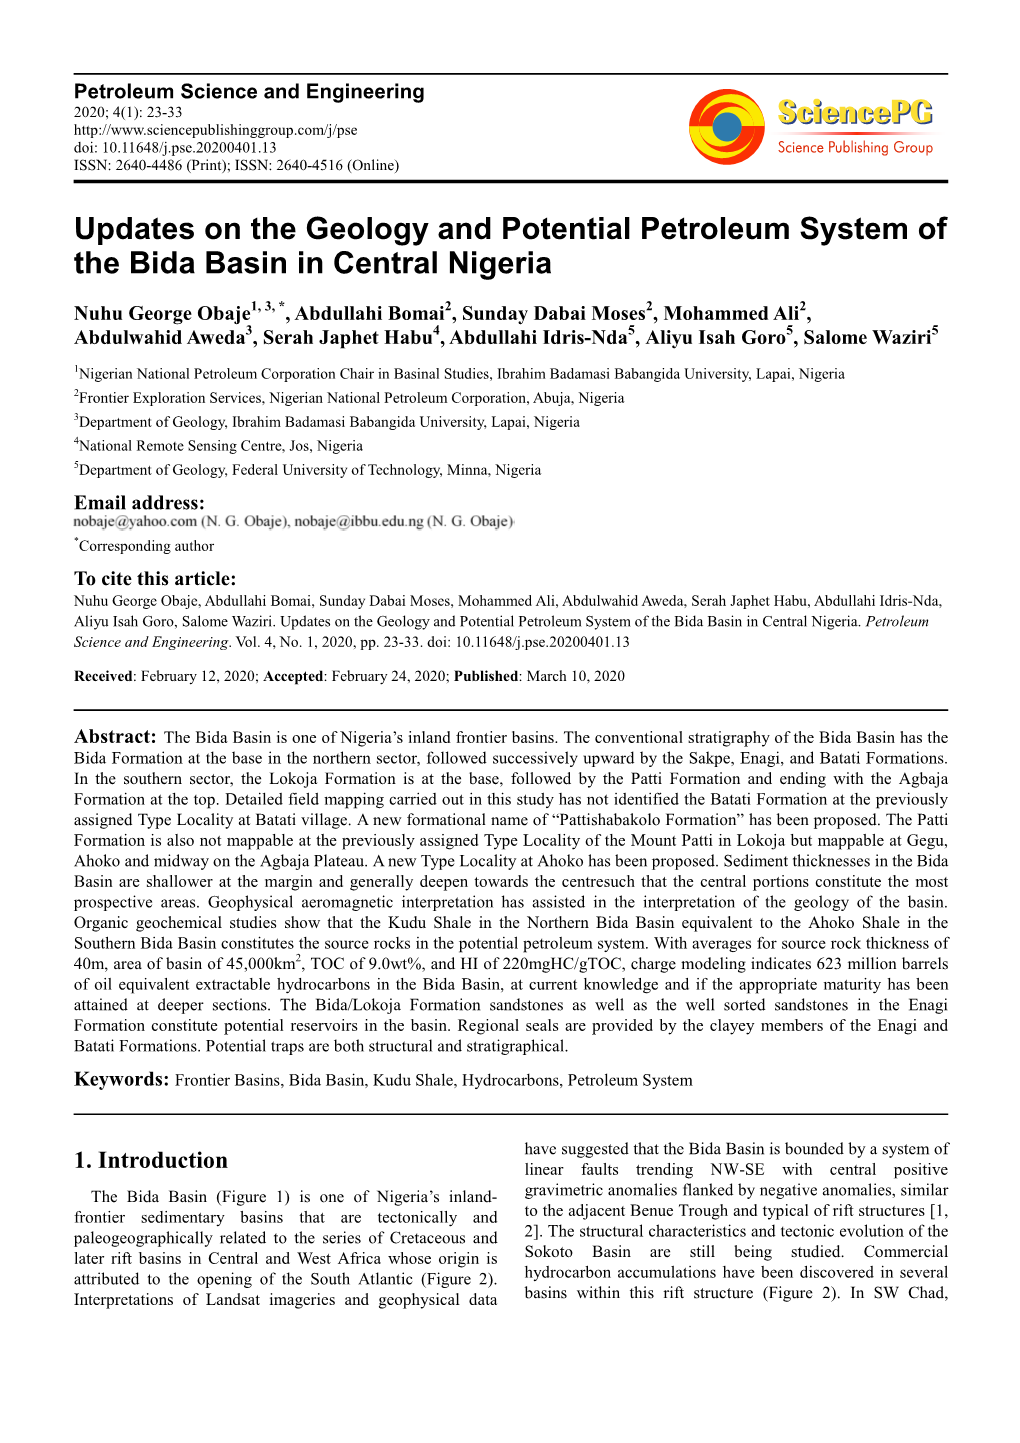 Updates on the Geology and Potential Petroleum System of the Bida Basin in Central Nigeria